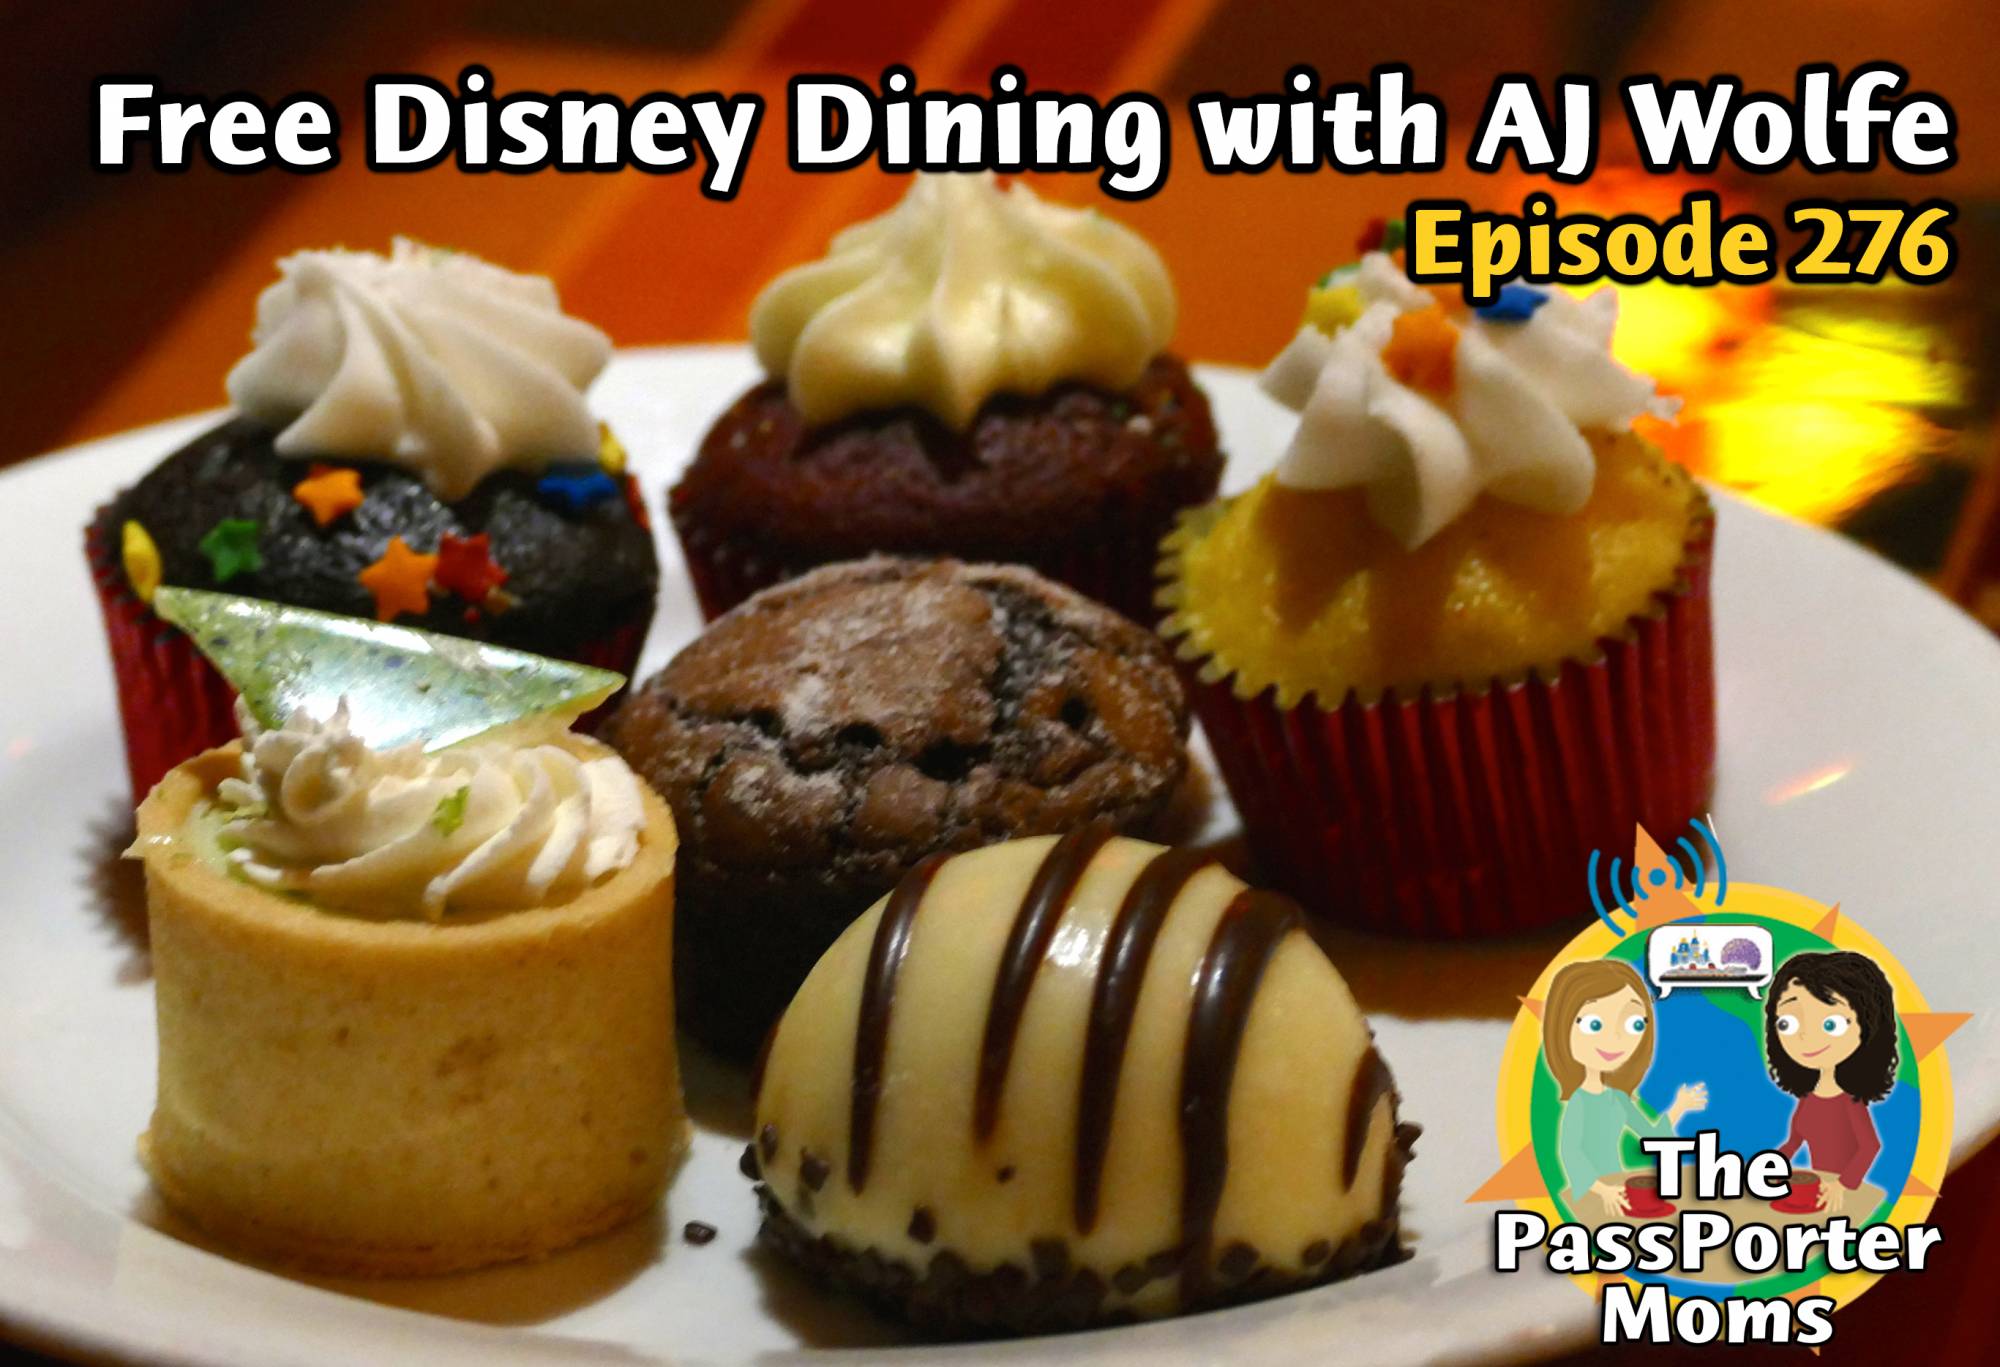 Free Disney Dining Offer with Aj Wolfe